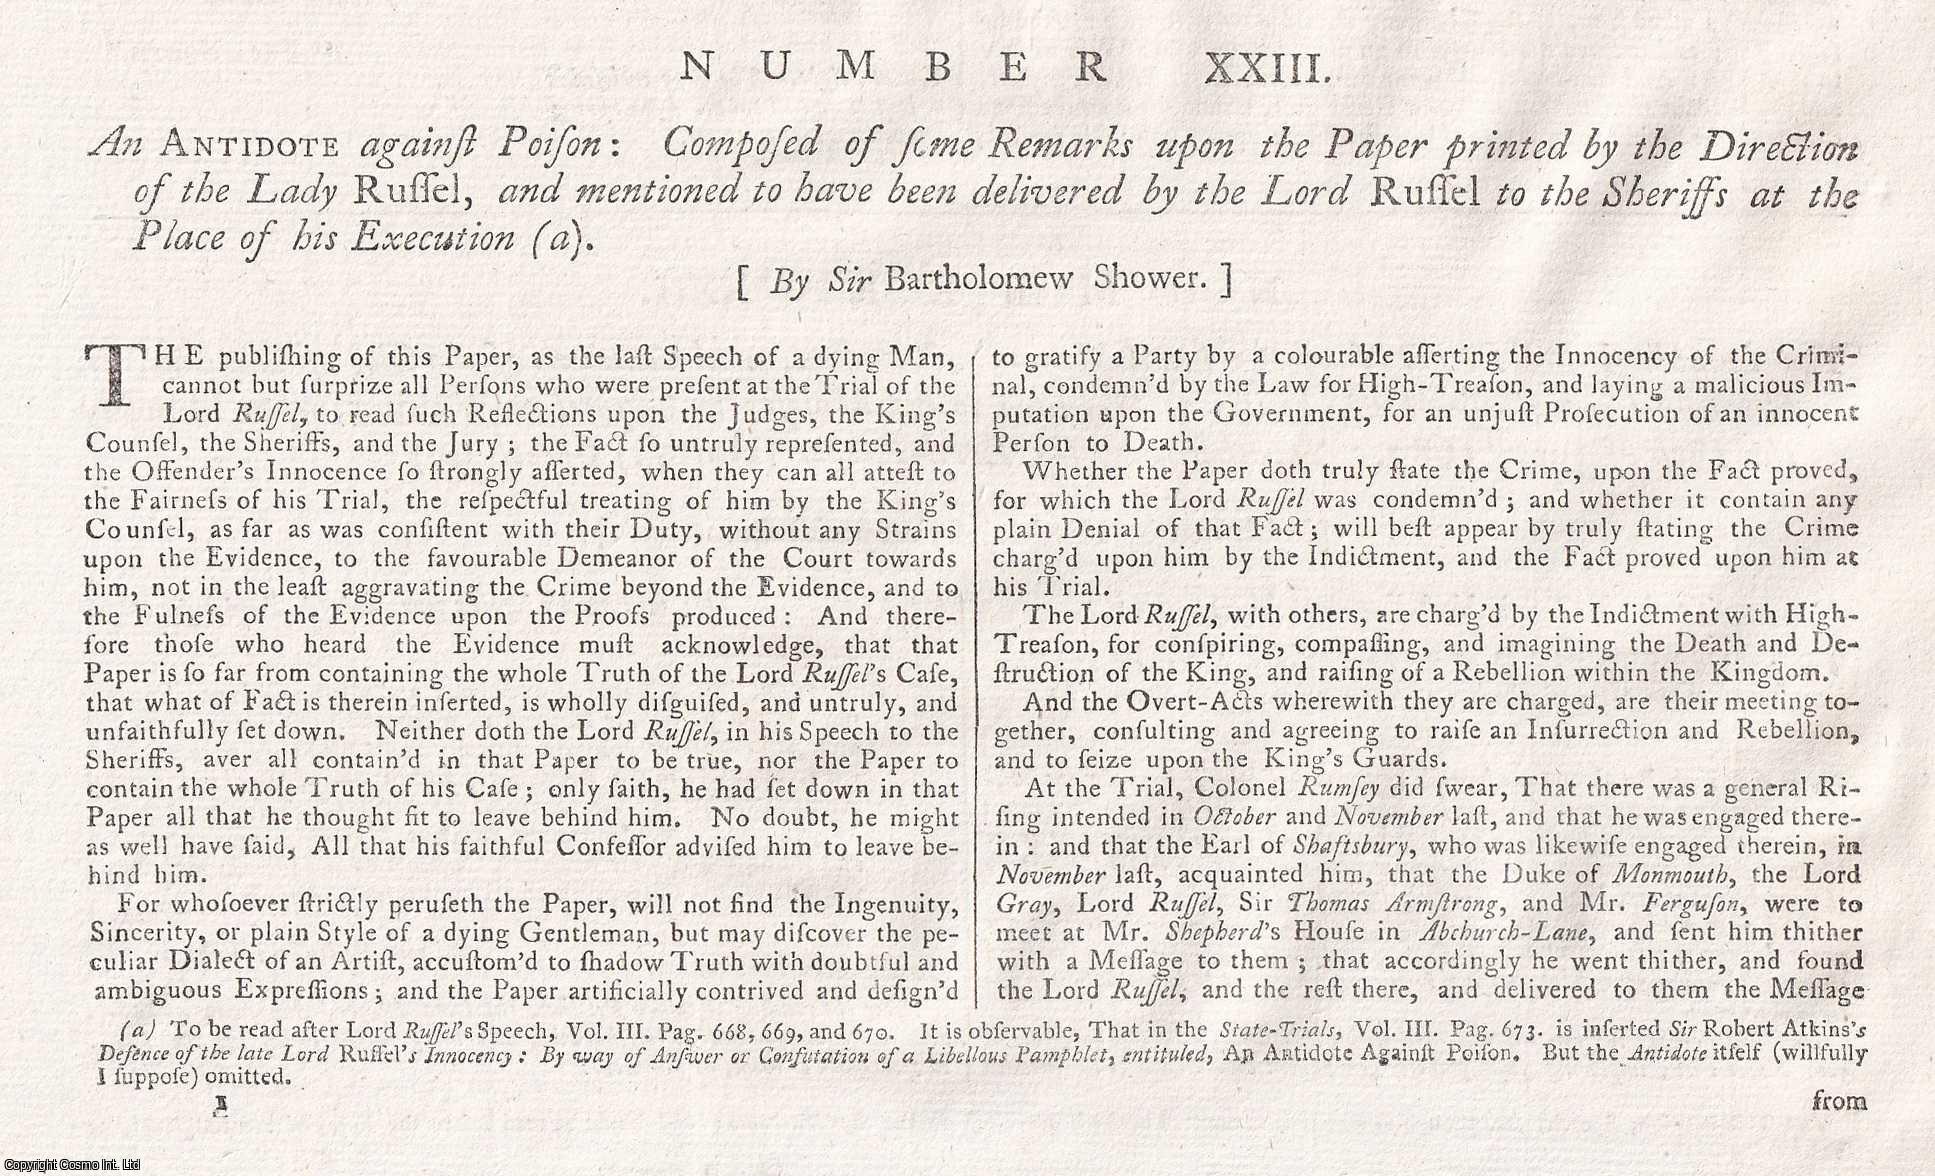 [Trial] - RYE HOUSE PLOT. An Antidote against Poison: Composed of some Remarks upon the Paper printed by the Direction of the Lady Russel, and mentioned to have been delivered by the Lord Russel to the Sheriffs at the Place of his Execution. By Sir Bartholomew Shower. 1683. An original article from the Collected State Trials.